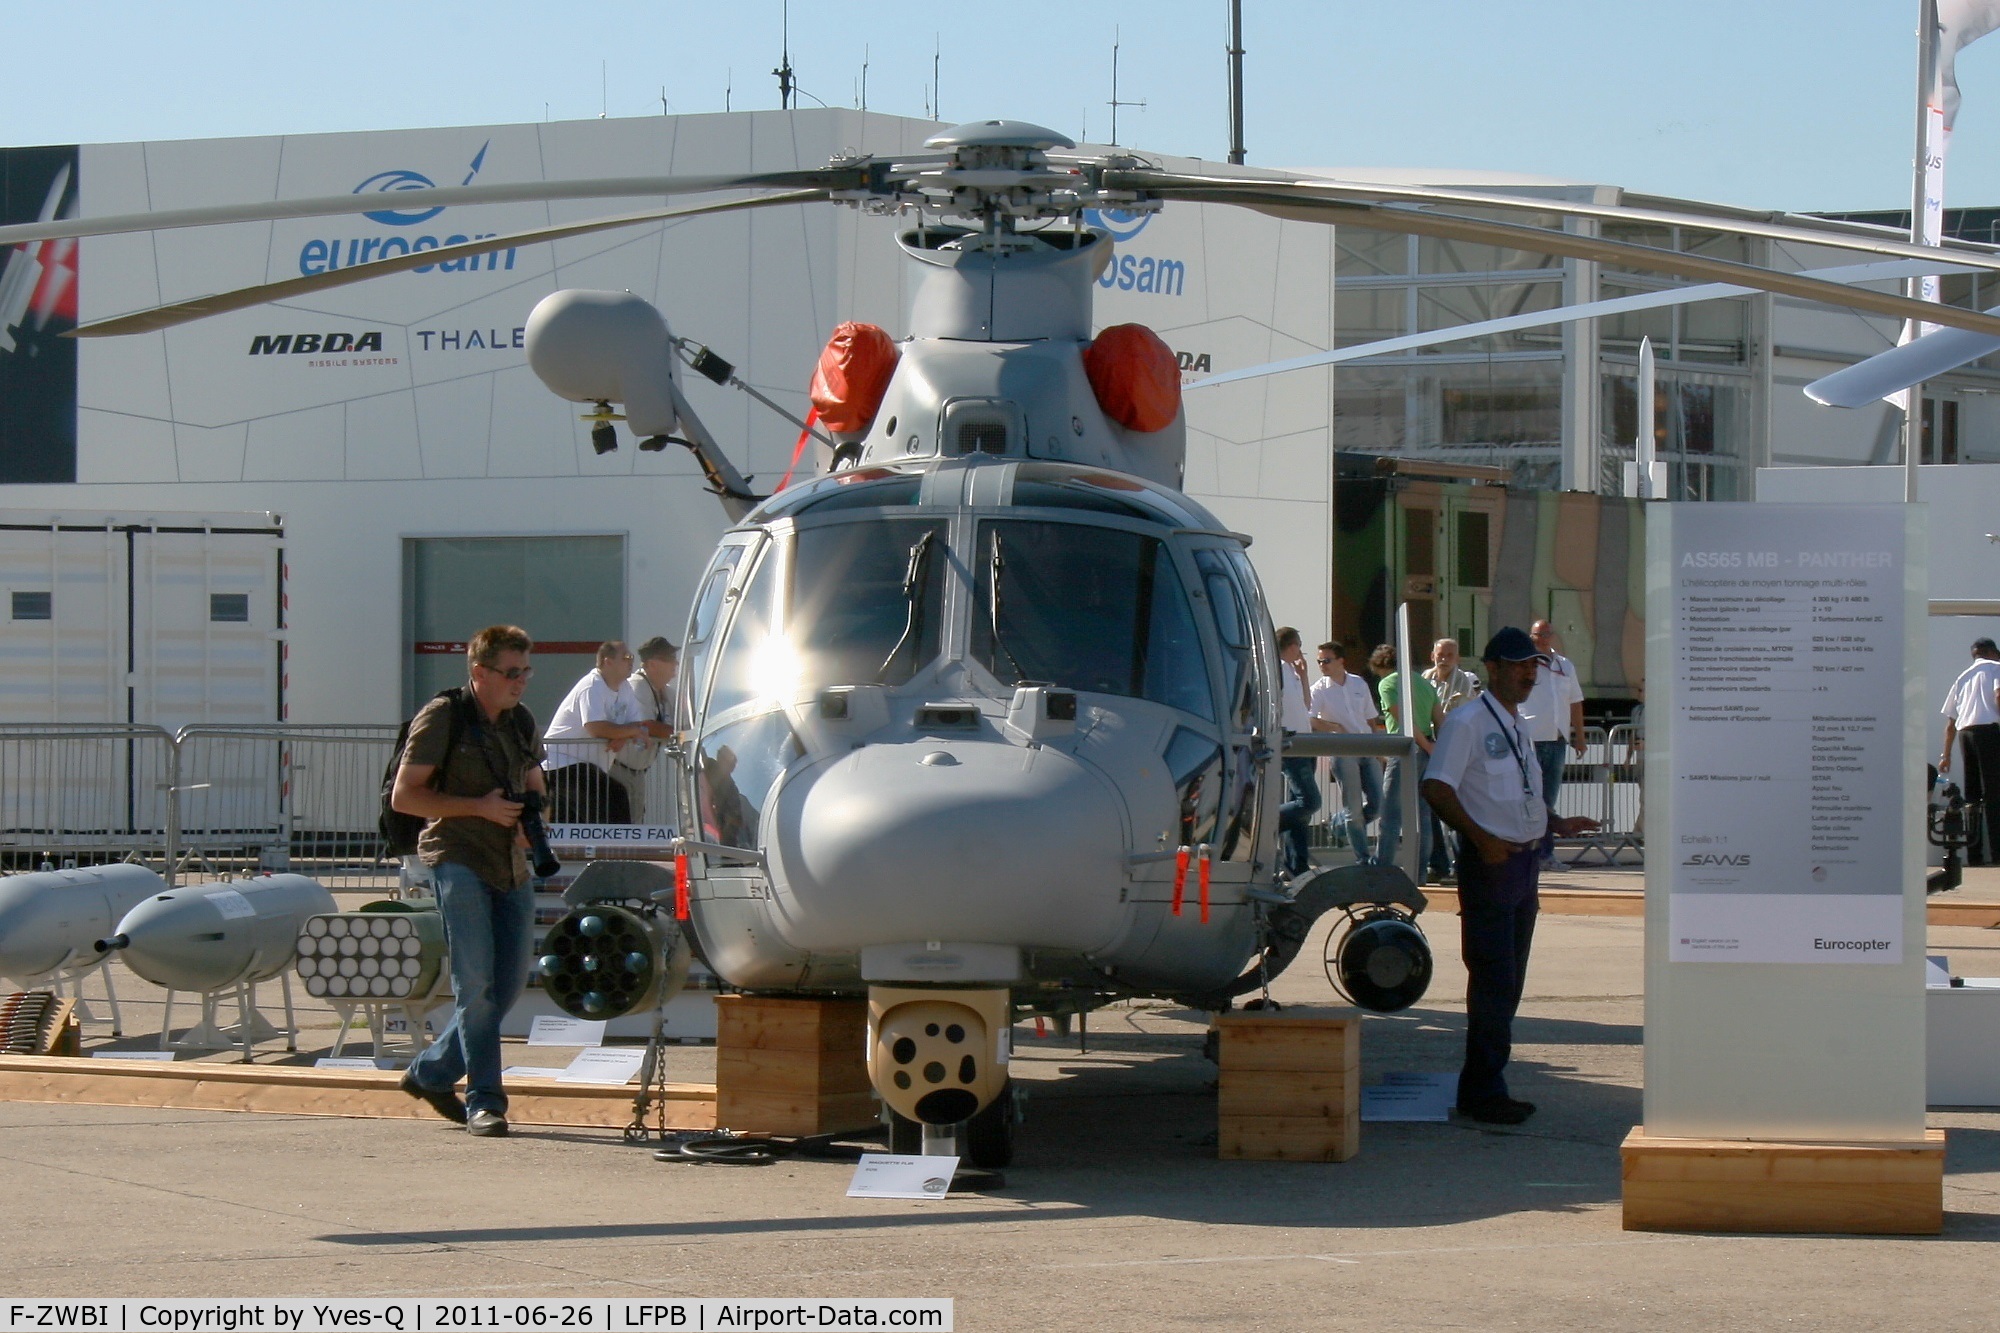 F-ZWBI, Eurocopter AS-565MB Panther C/N 6866, Eurocopter AS-565MB Panther  for Bulgarian Navy, Static Display, Paris Le Bourget (LFPB-LBG) Air Show 2011